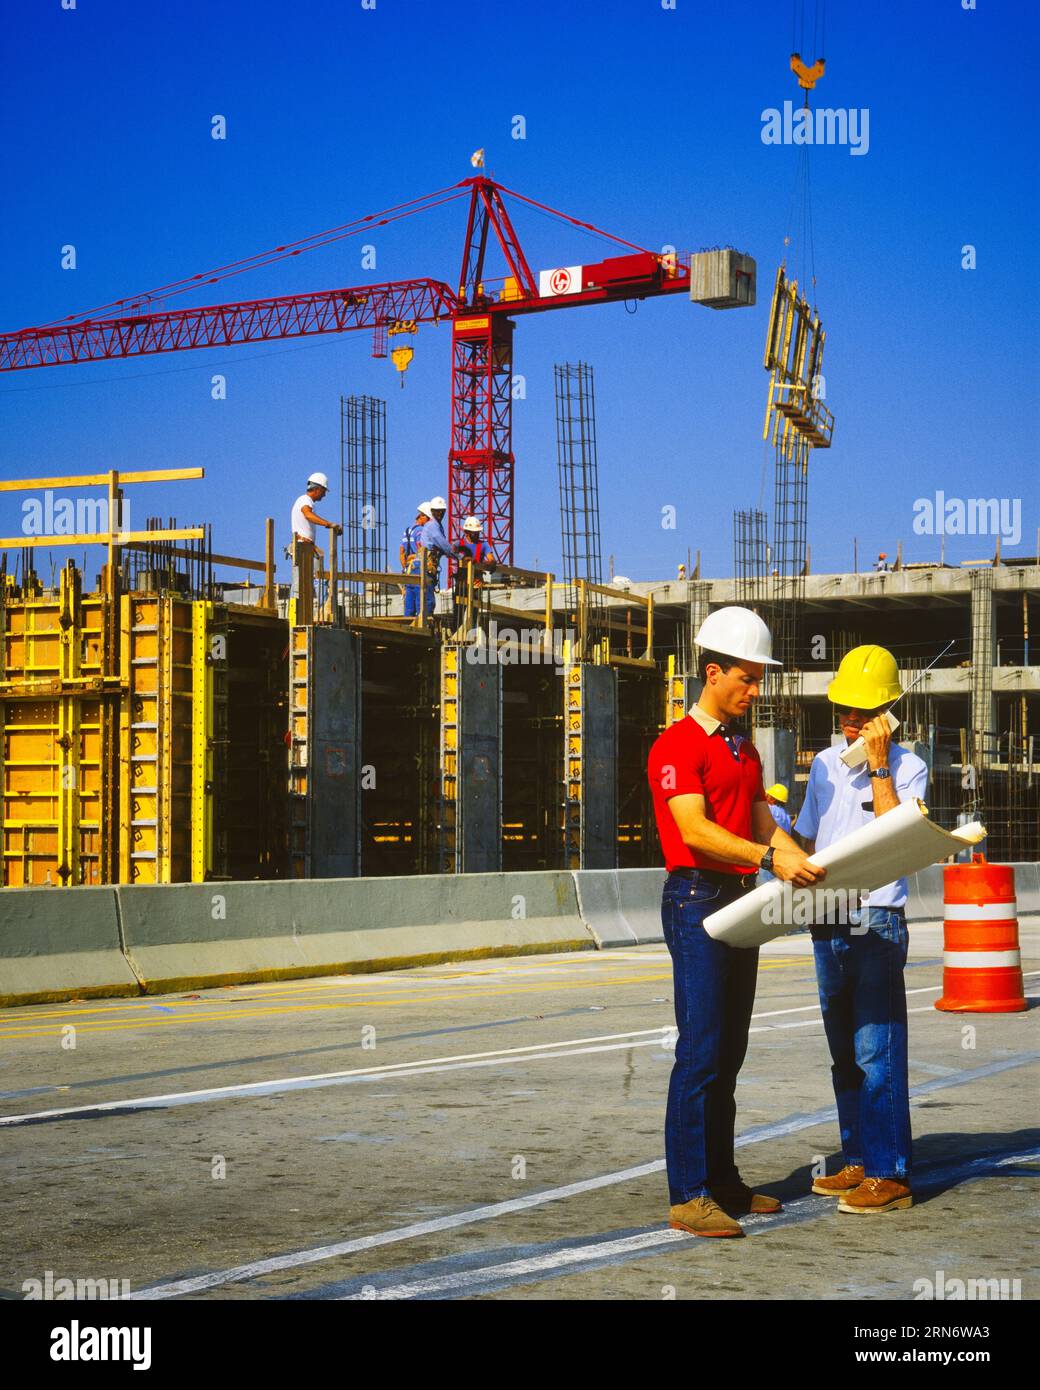 1990s CONSTRUCTION SITE TWO MEN REVIEWING PLANS WEARING HARD HATS JEANS ONE HOLDING MOBILE PHONE CRANE & WORKERS IN BACKGROUND - ks29403 GRD001 HARS TEAMWORK ENGINEER ARCHITECTURE SITE COMMUNICATING MANAGER PLANS COPY SPACE FULL-LENGTH PERSONS MALES ARCHITECT BUILDINGS EXECUTIVES CRANE GOALS PROPERTY EXTERIOR LABOR SUPERVISOR EMPLOYMENT OCCUPATIONS PHONES REAL ESTATE BOSSES REVIEWING STRUCTURES TELEPHONES EDIFICE EMPLOYEE CREATIVITY MANAGERS MID-ADULT MID-ADULT MAN SOLUTIONS CAUCASIAN ETHNICITY CONTRACTOR LABORING OLD FASHIONED Stock Photo